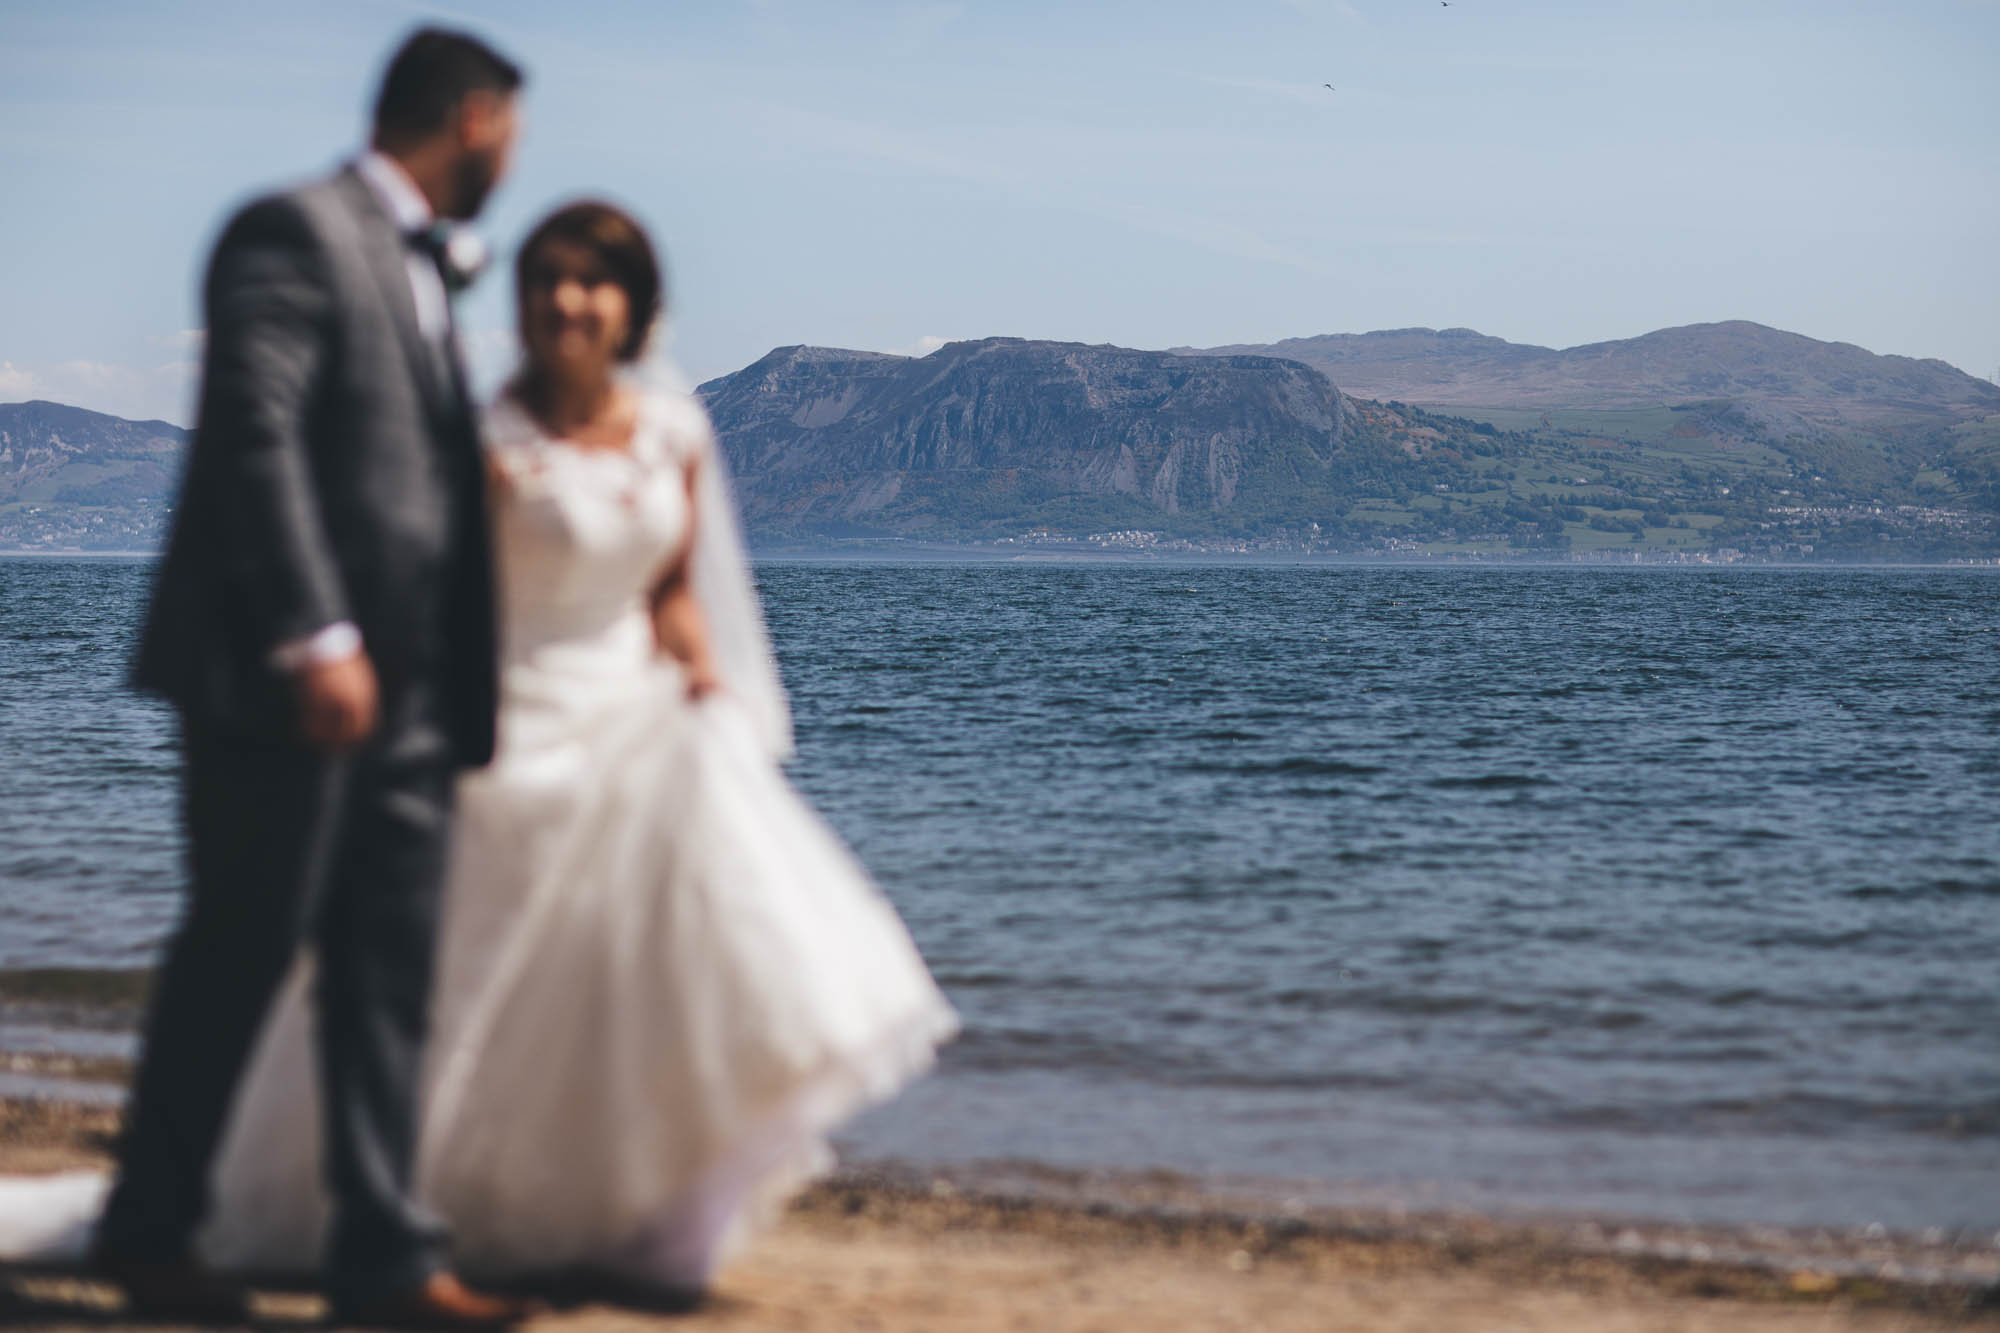 The bride and groom are out of focus in the foreground of the shot to draw the attention to the snowdonia mountainscape and sea in the background